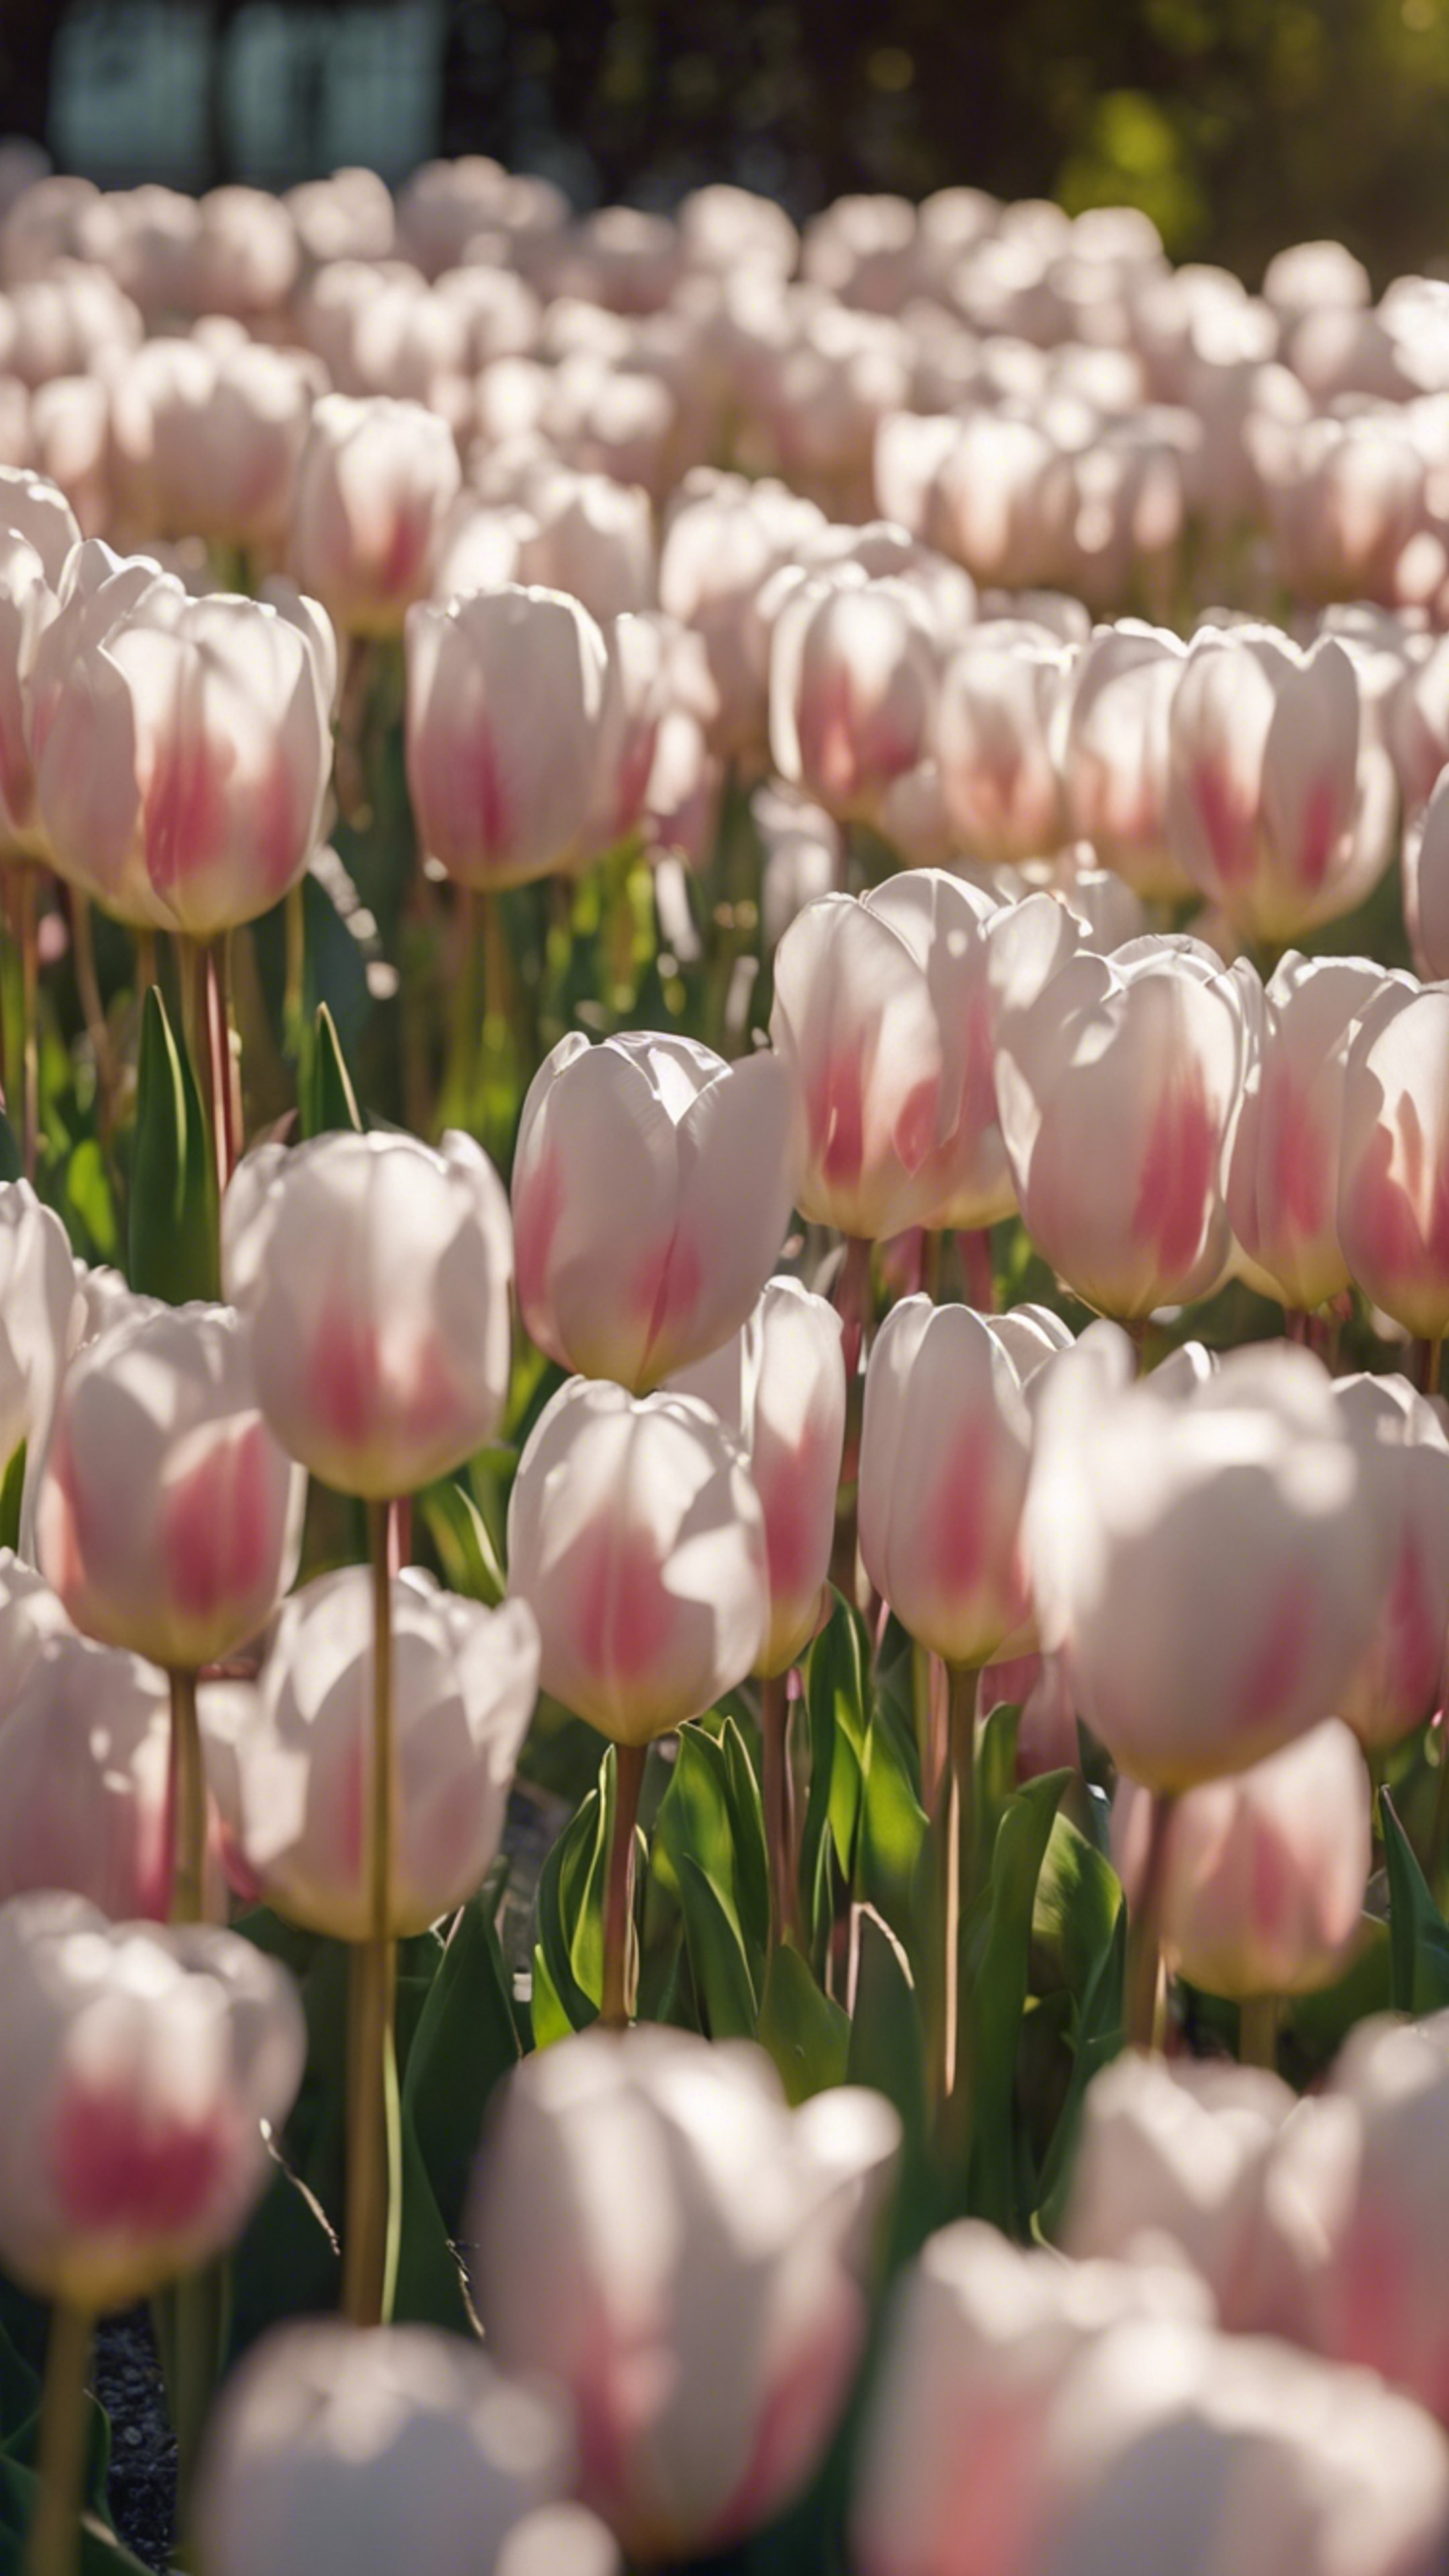 A garden filled with white and pink tulips, shimmering under the soft glow of a morning sun. Tapet[0043435f230e41f4a509]